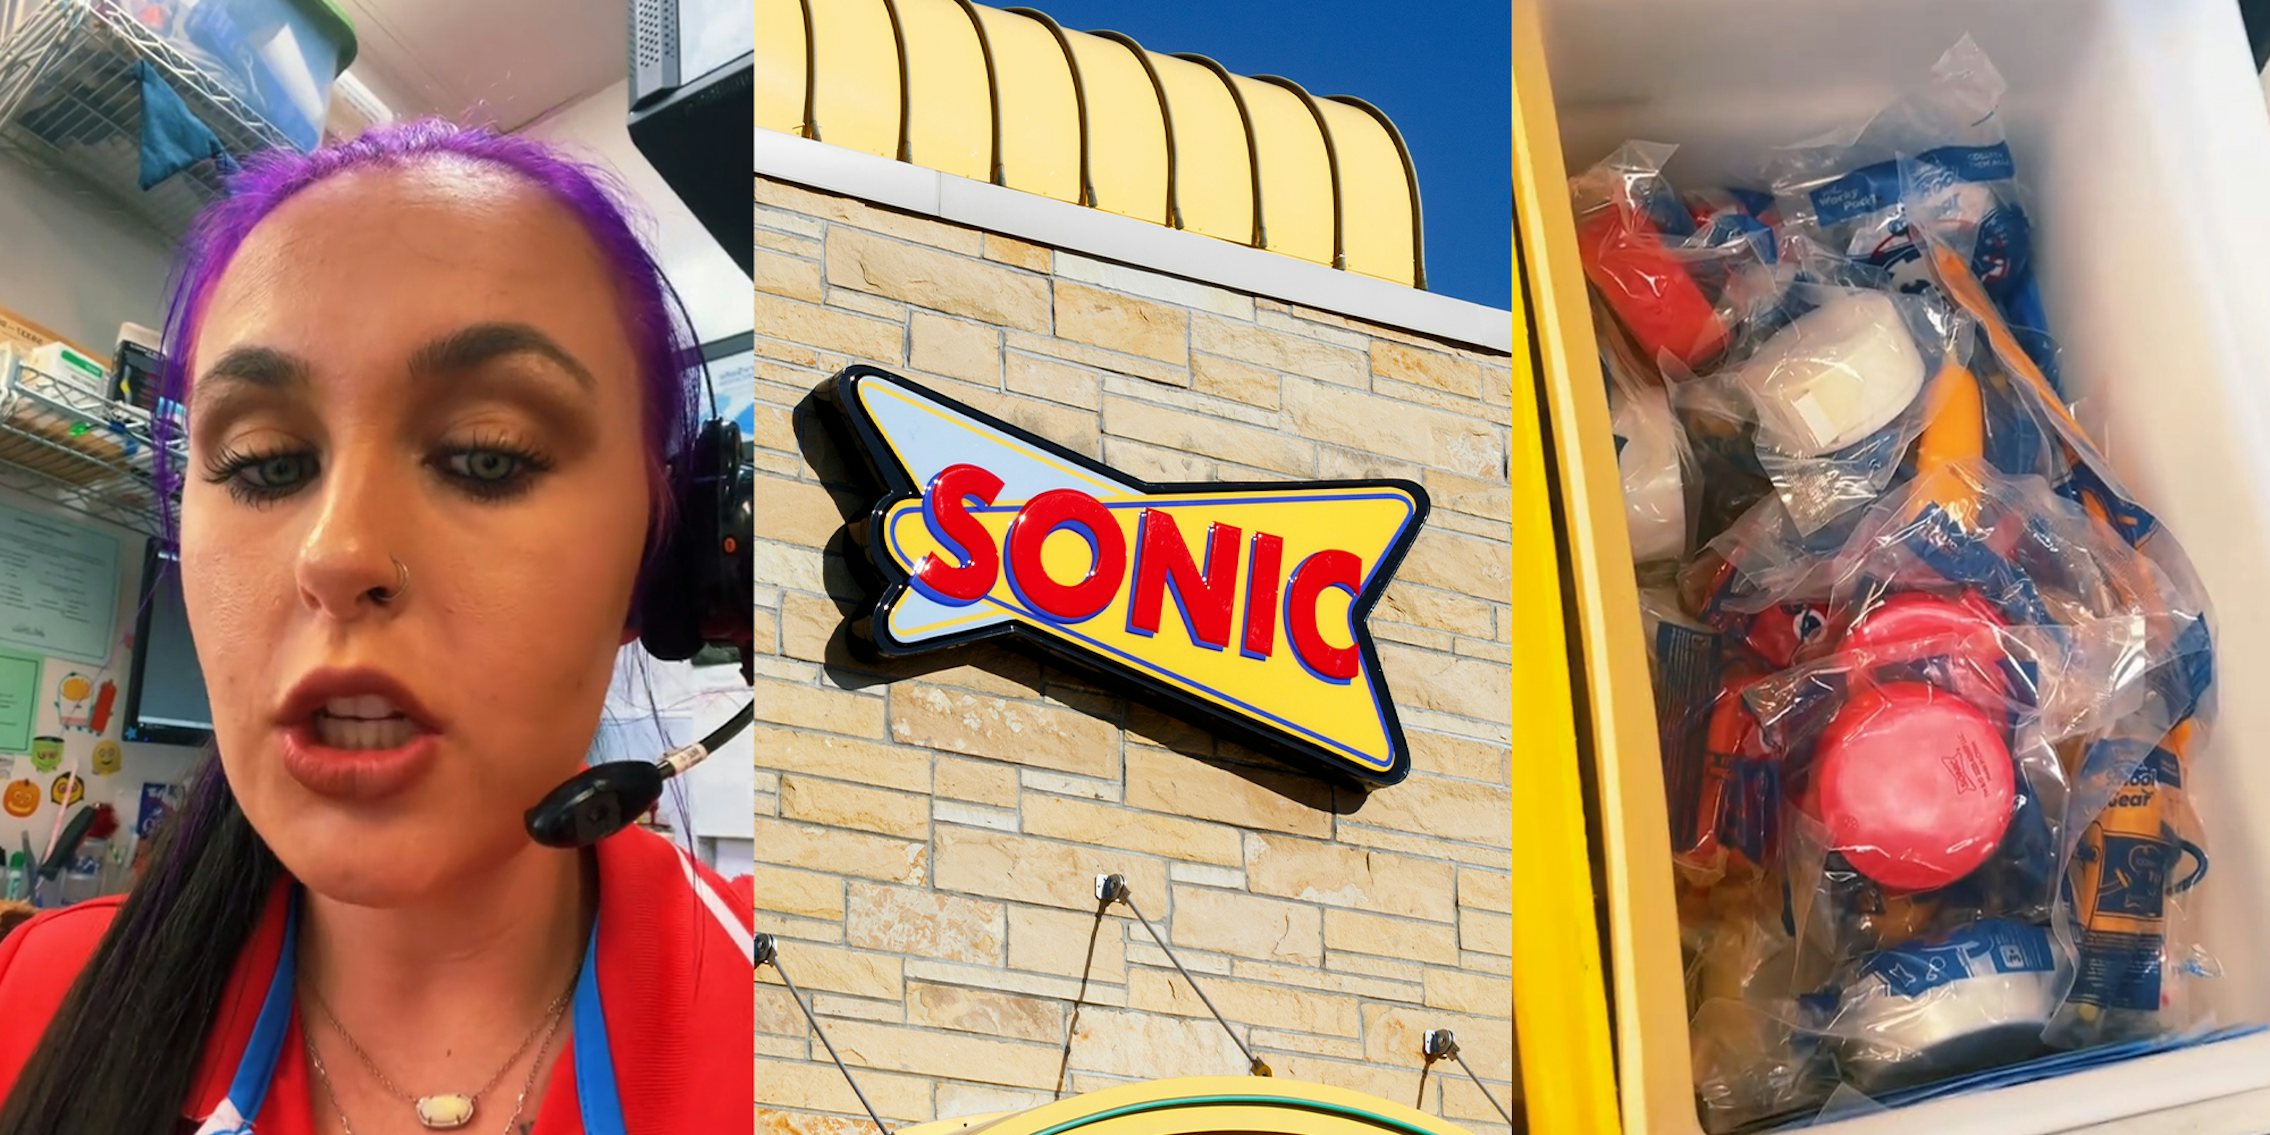 Sonic worker says they just changed onion rings recipe.